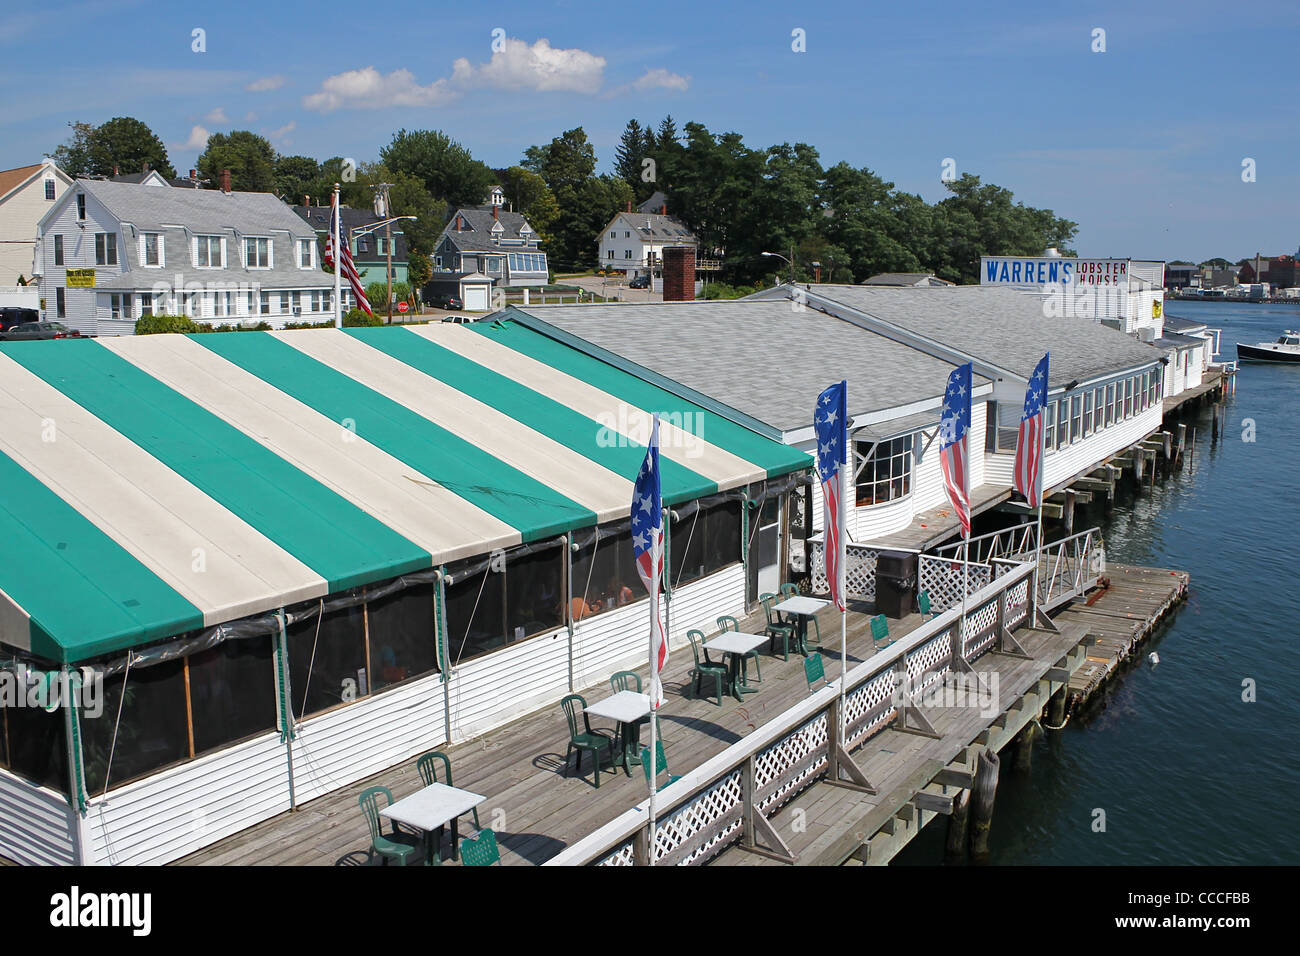 Warren's Lobster House, Kittery Maine, close to the Portsmouth, New